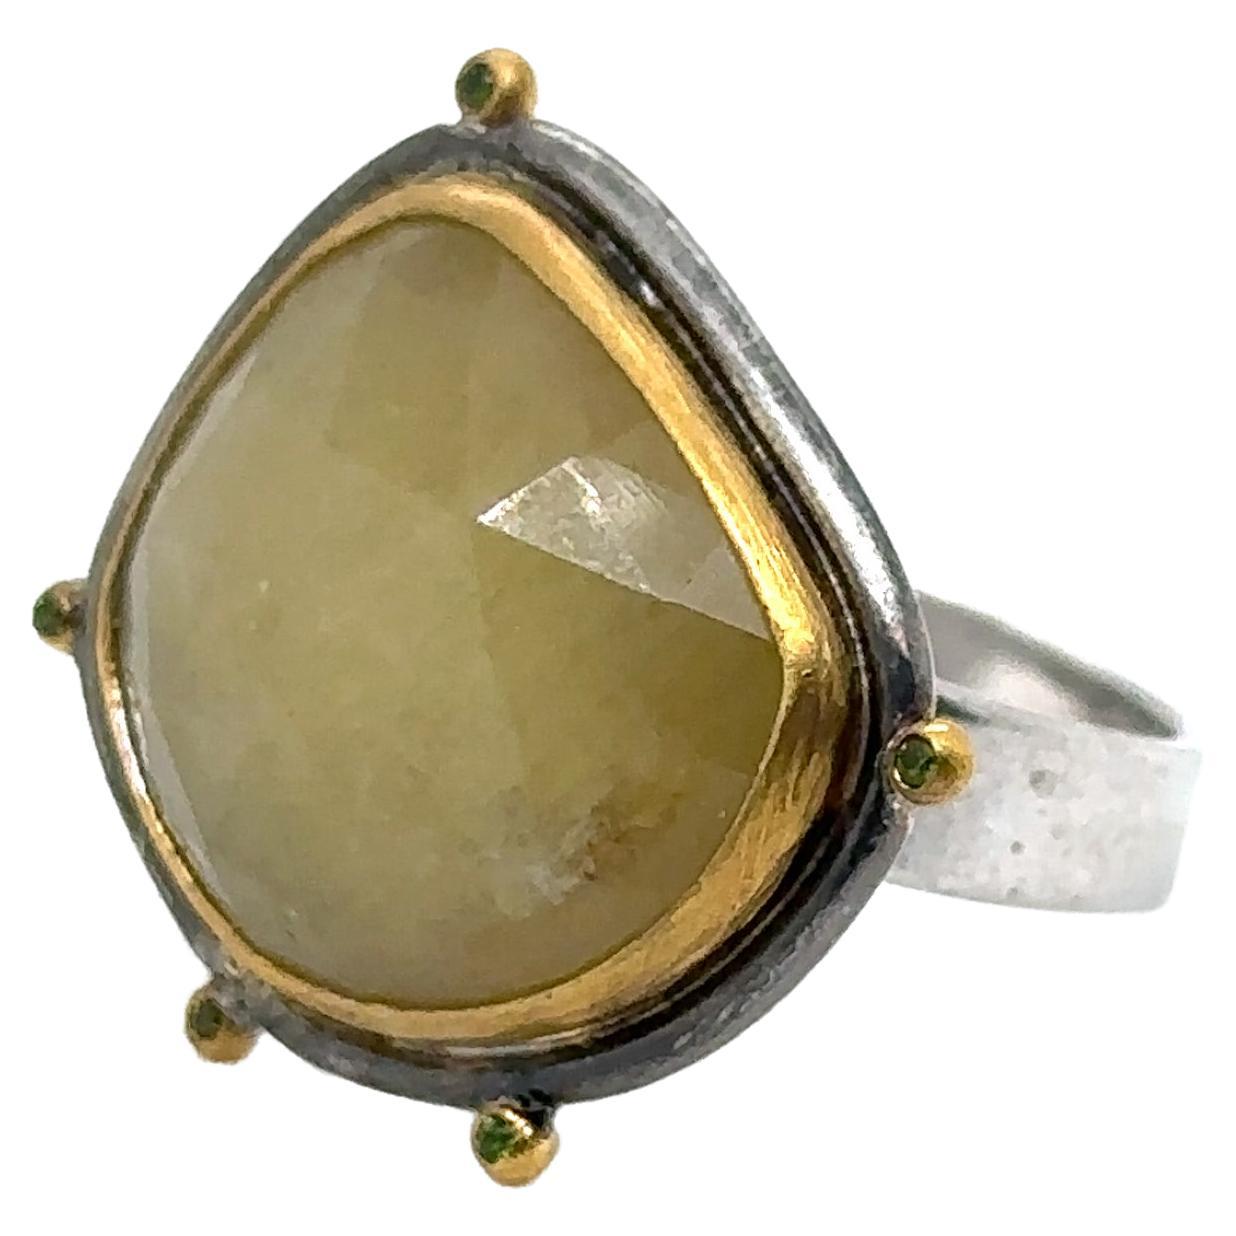 JAS-19-1835 - 24K/SS HANDMADE RING w CHROME DIOPSIDES & NATURAL YELLOW SAPPHIRE For Sale